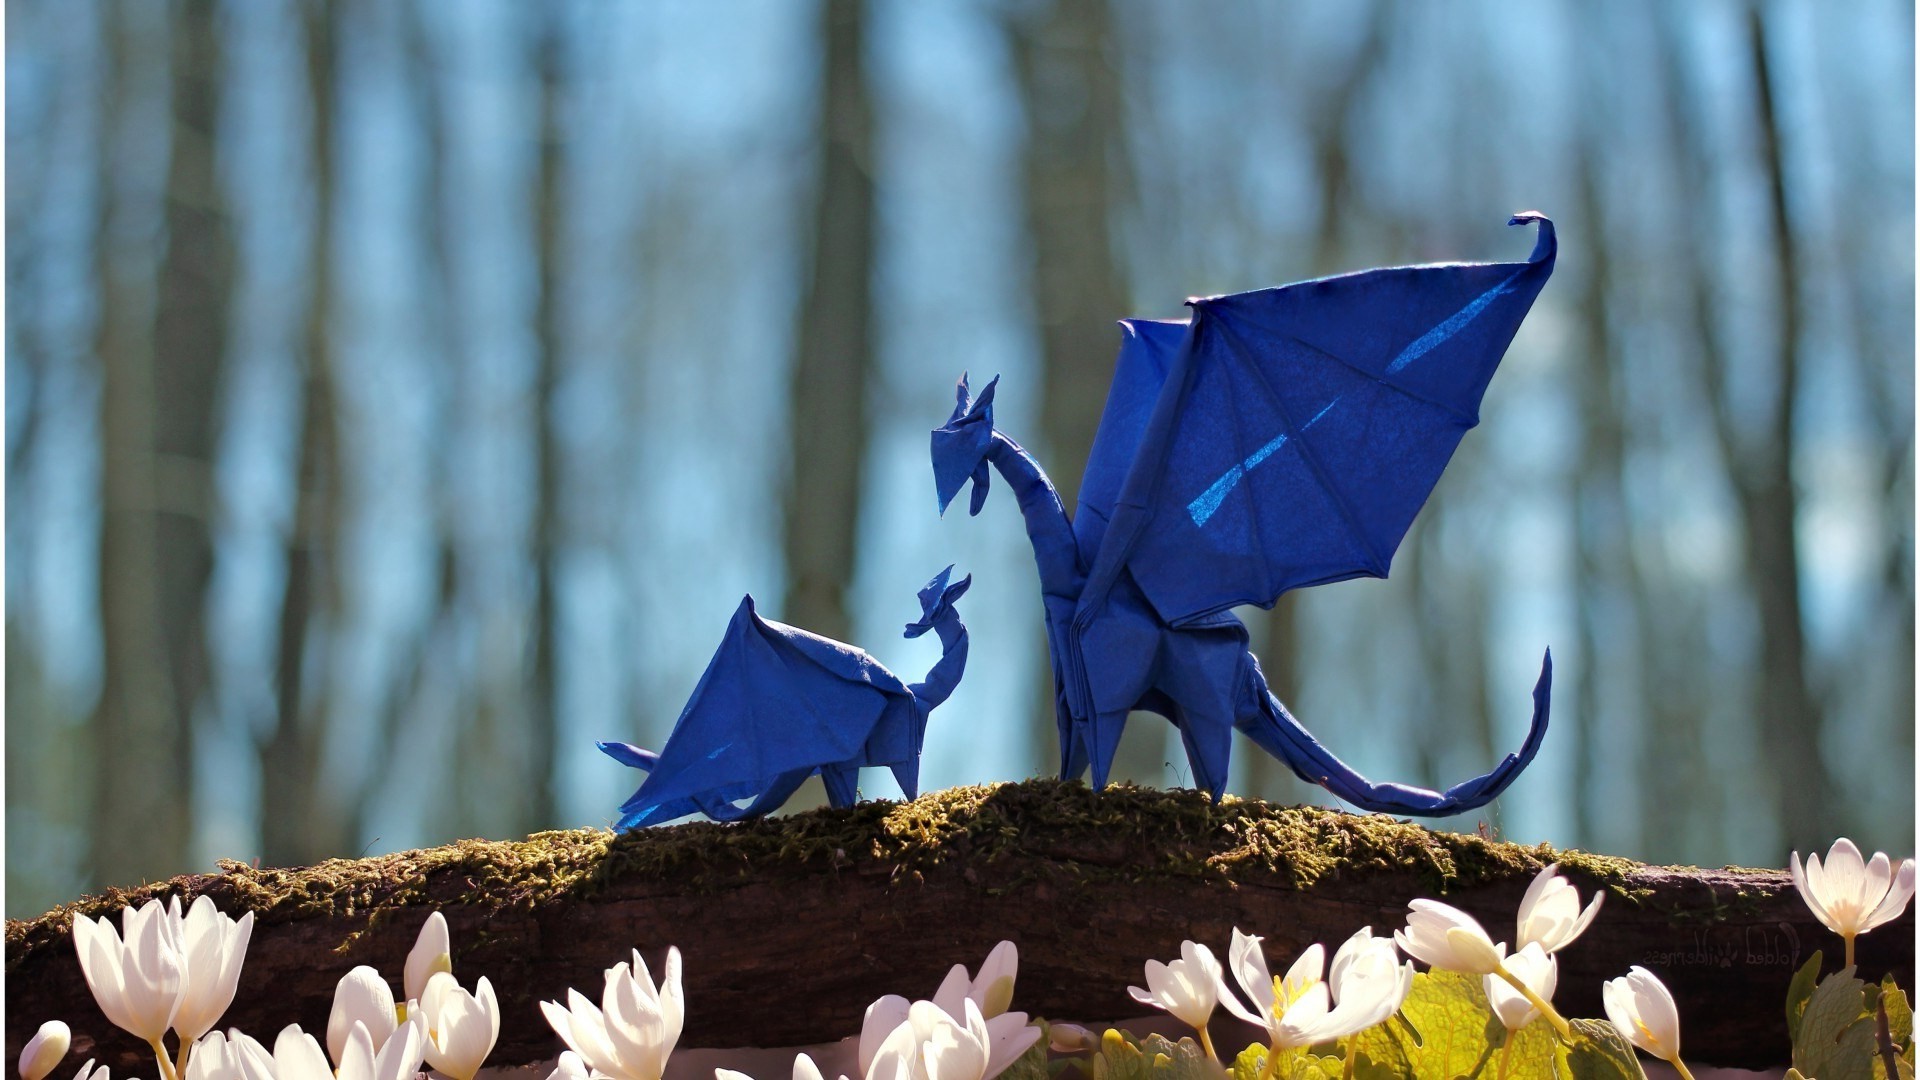 dragon, Wings, Fantasy Art, Nature, Origami, Paper, Depth Of Field, Trees, Branch, Flowers, Tail Wallpaper